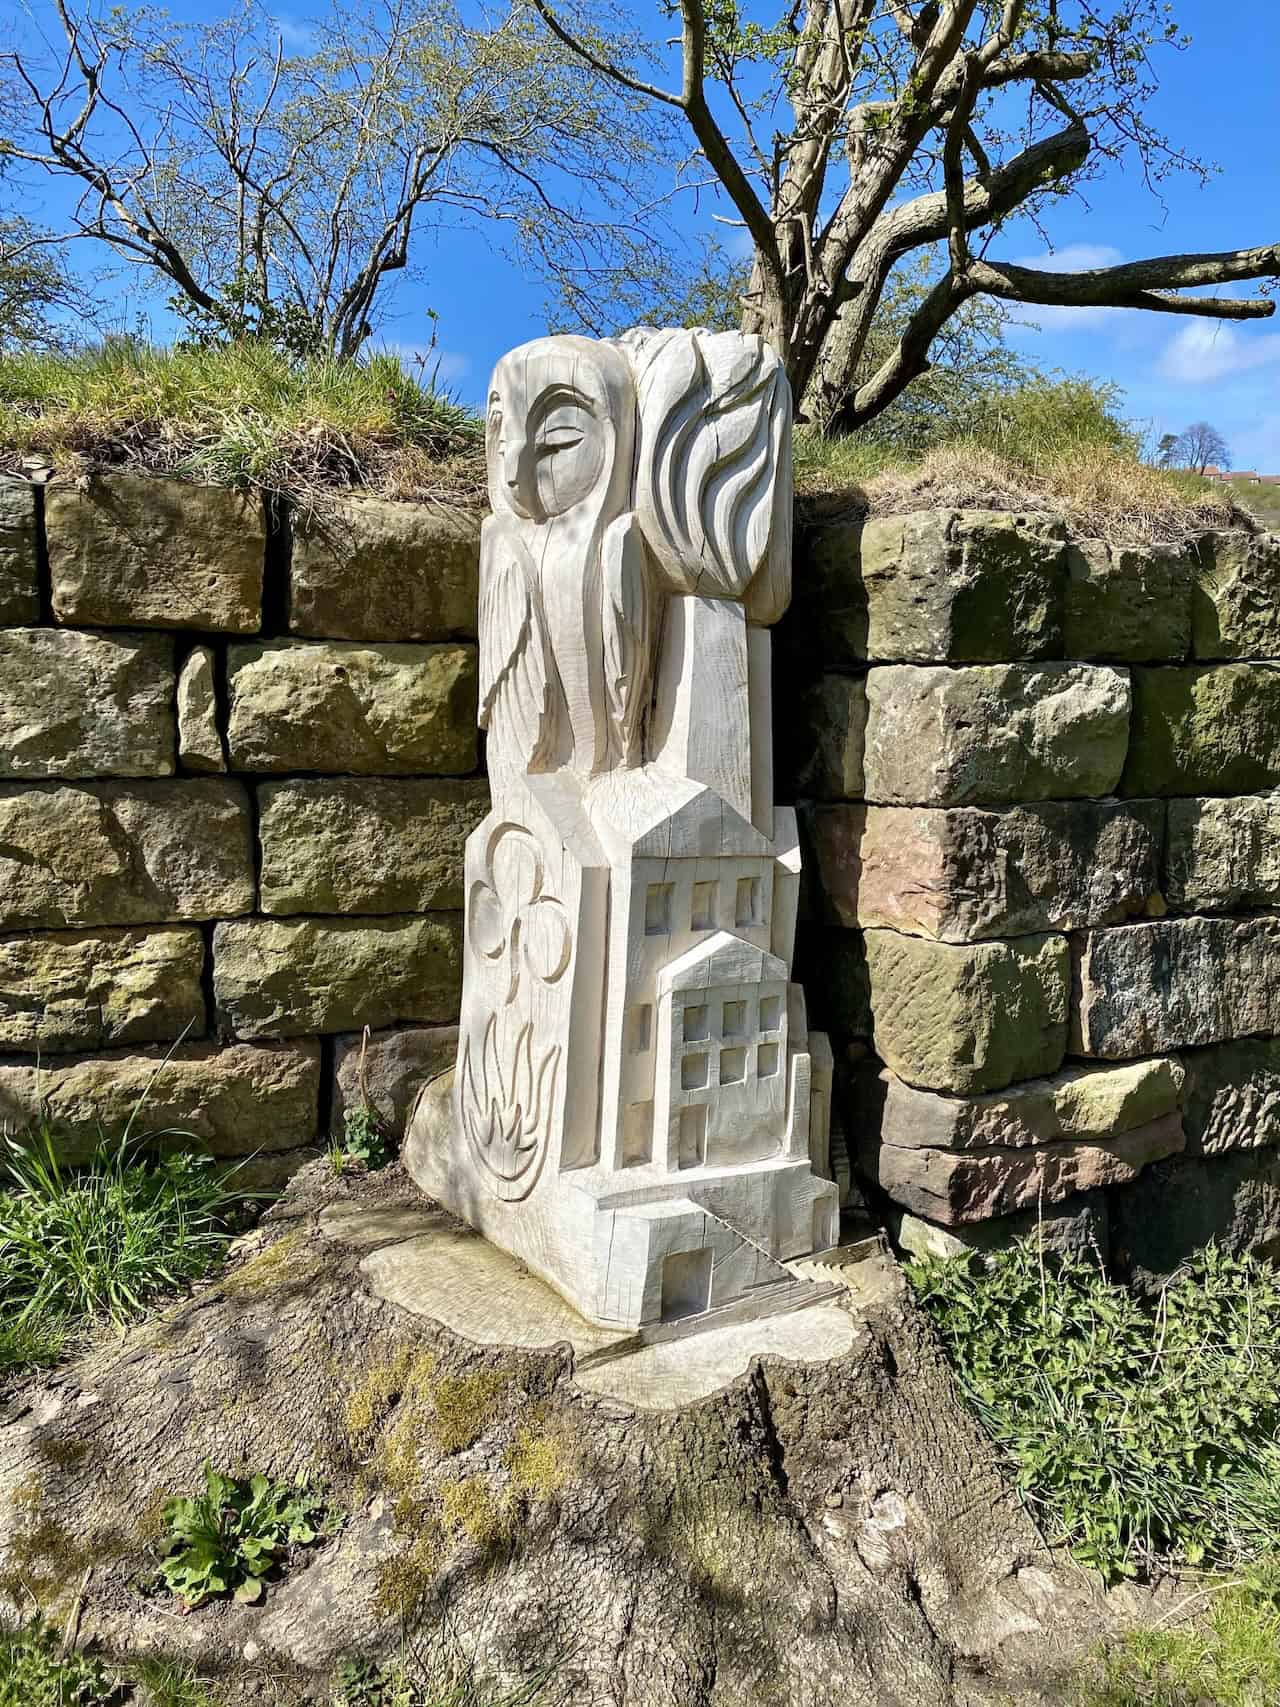 Amazing wood carvings at the site of the Esk Valley ironstone mine can be found along the Goathland to Grosmont Rail Trail.